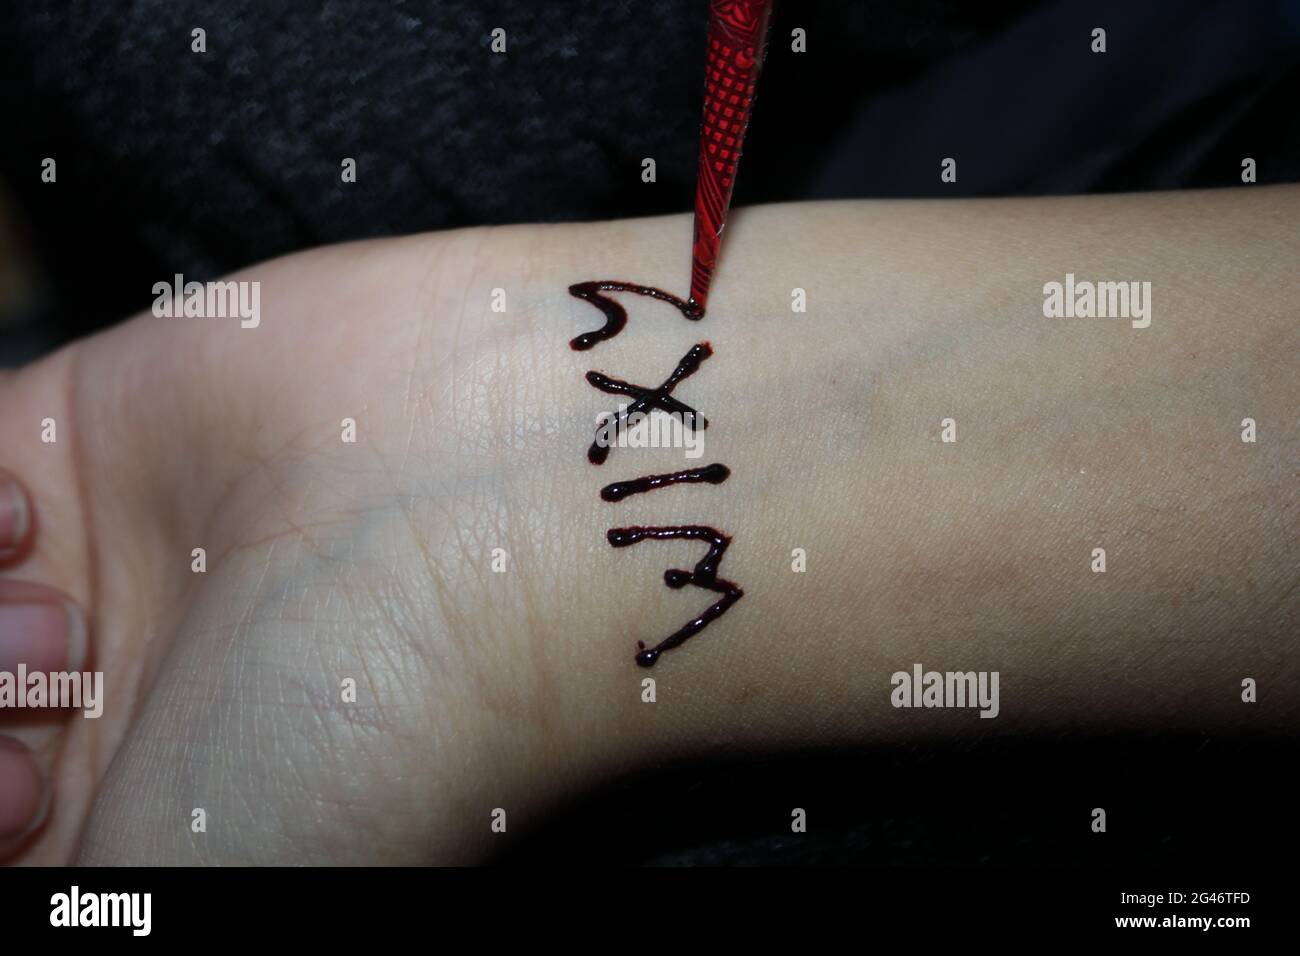 Drawing process of henna menhdi text on a girl's hand. Stock Photo